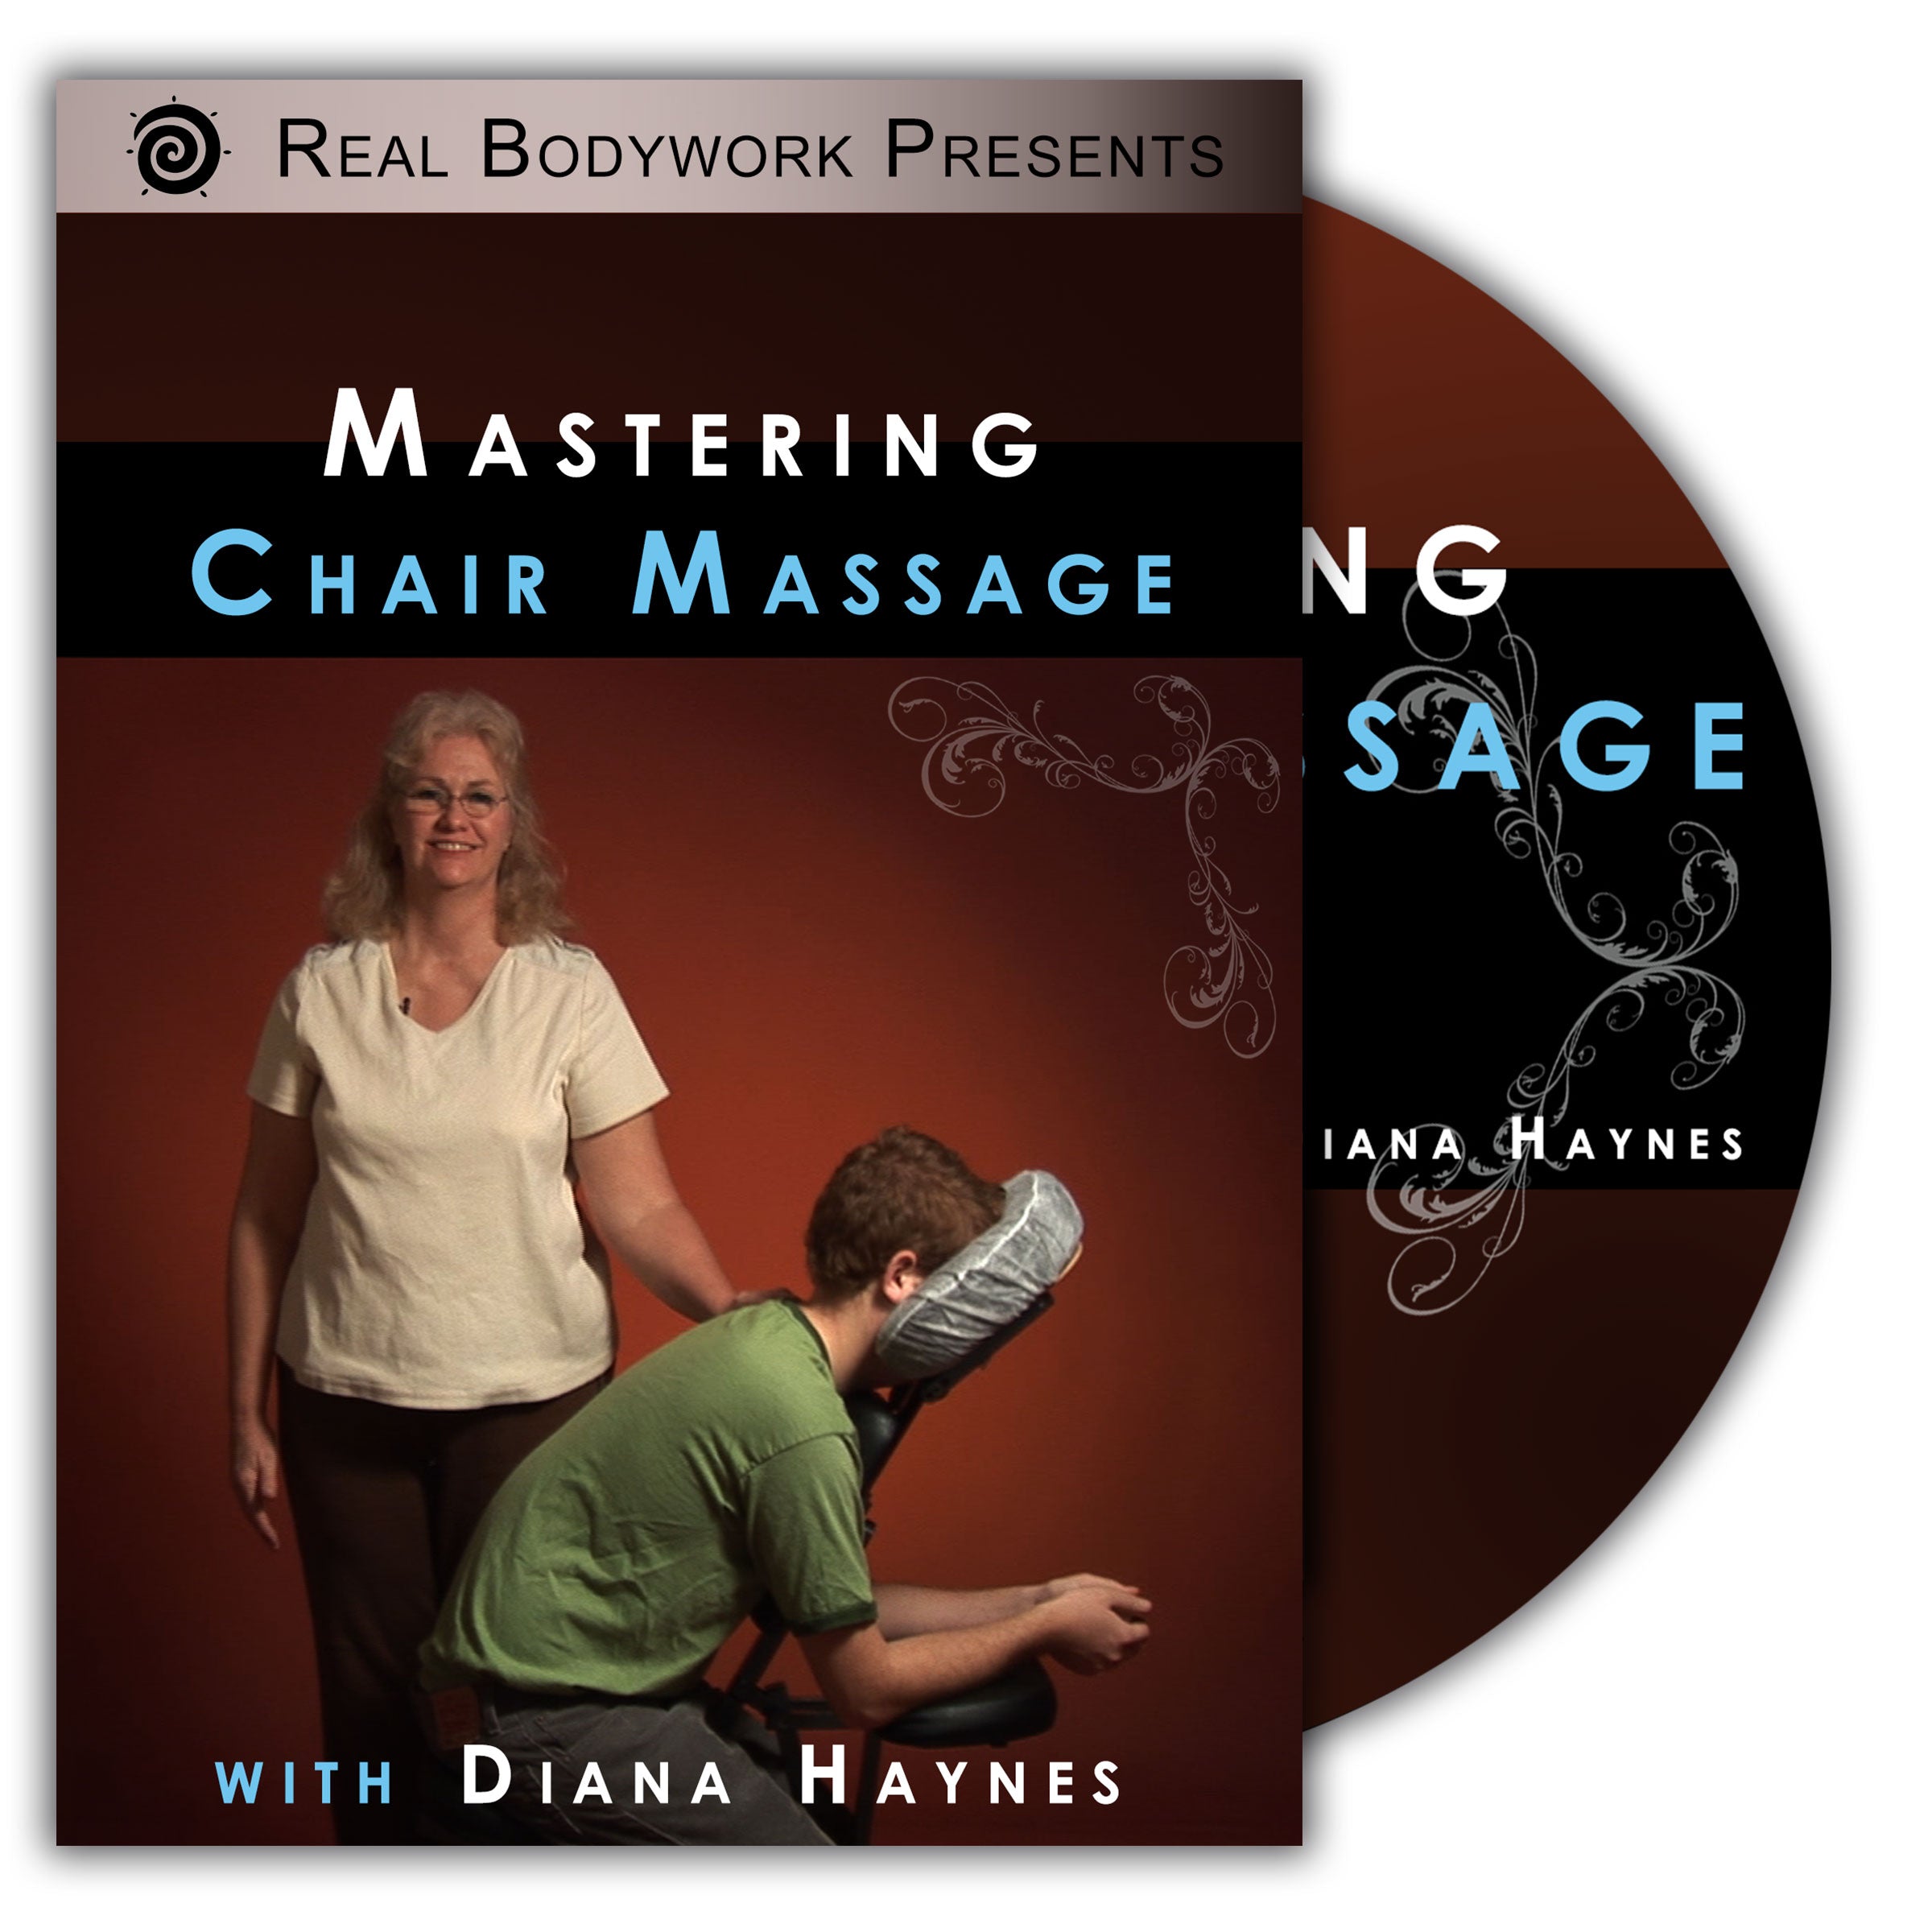 Mastering Chair Massage Video on DVD & Streaming Version - Real Bodywork